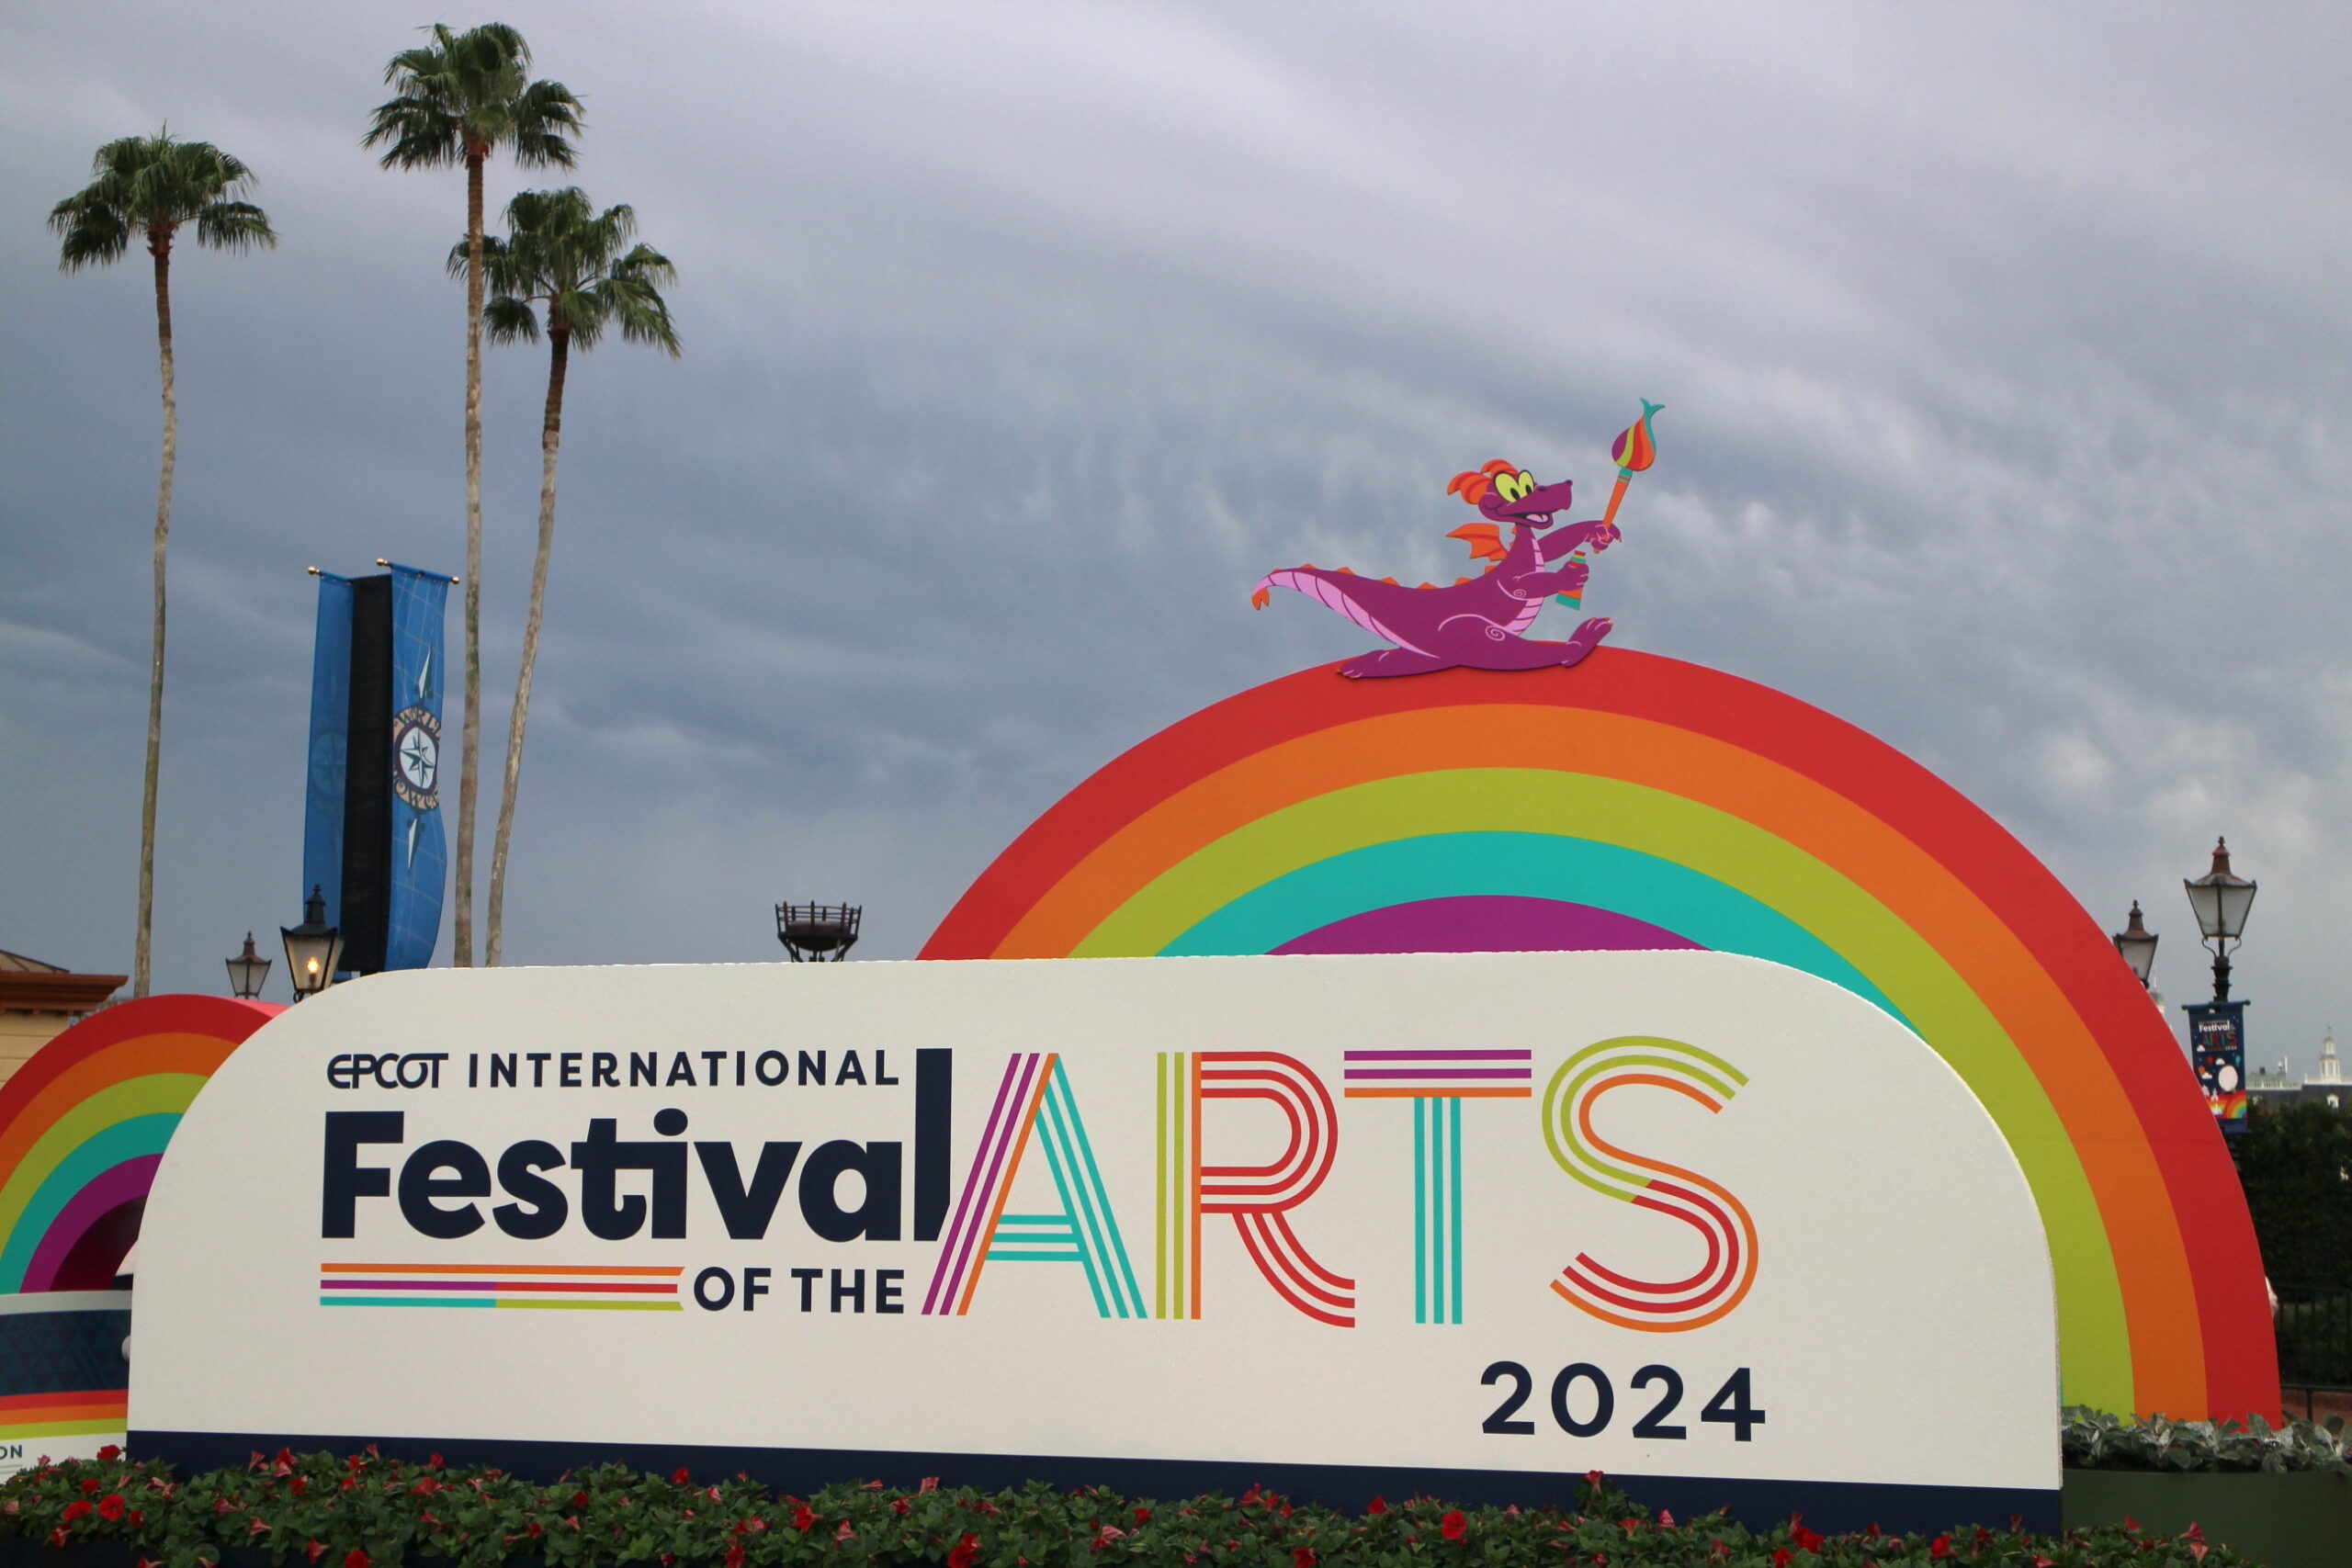 a rainbow with a small purple dragon on it over an Epcot Festival of the Arts sign